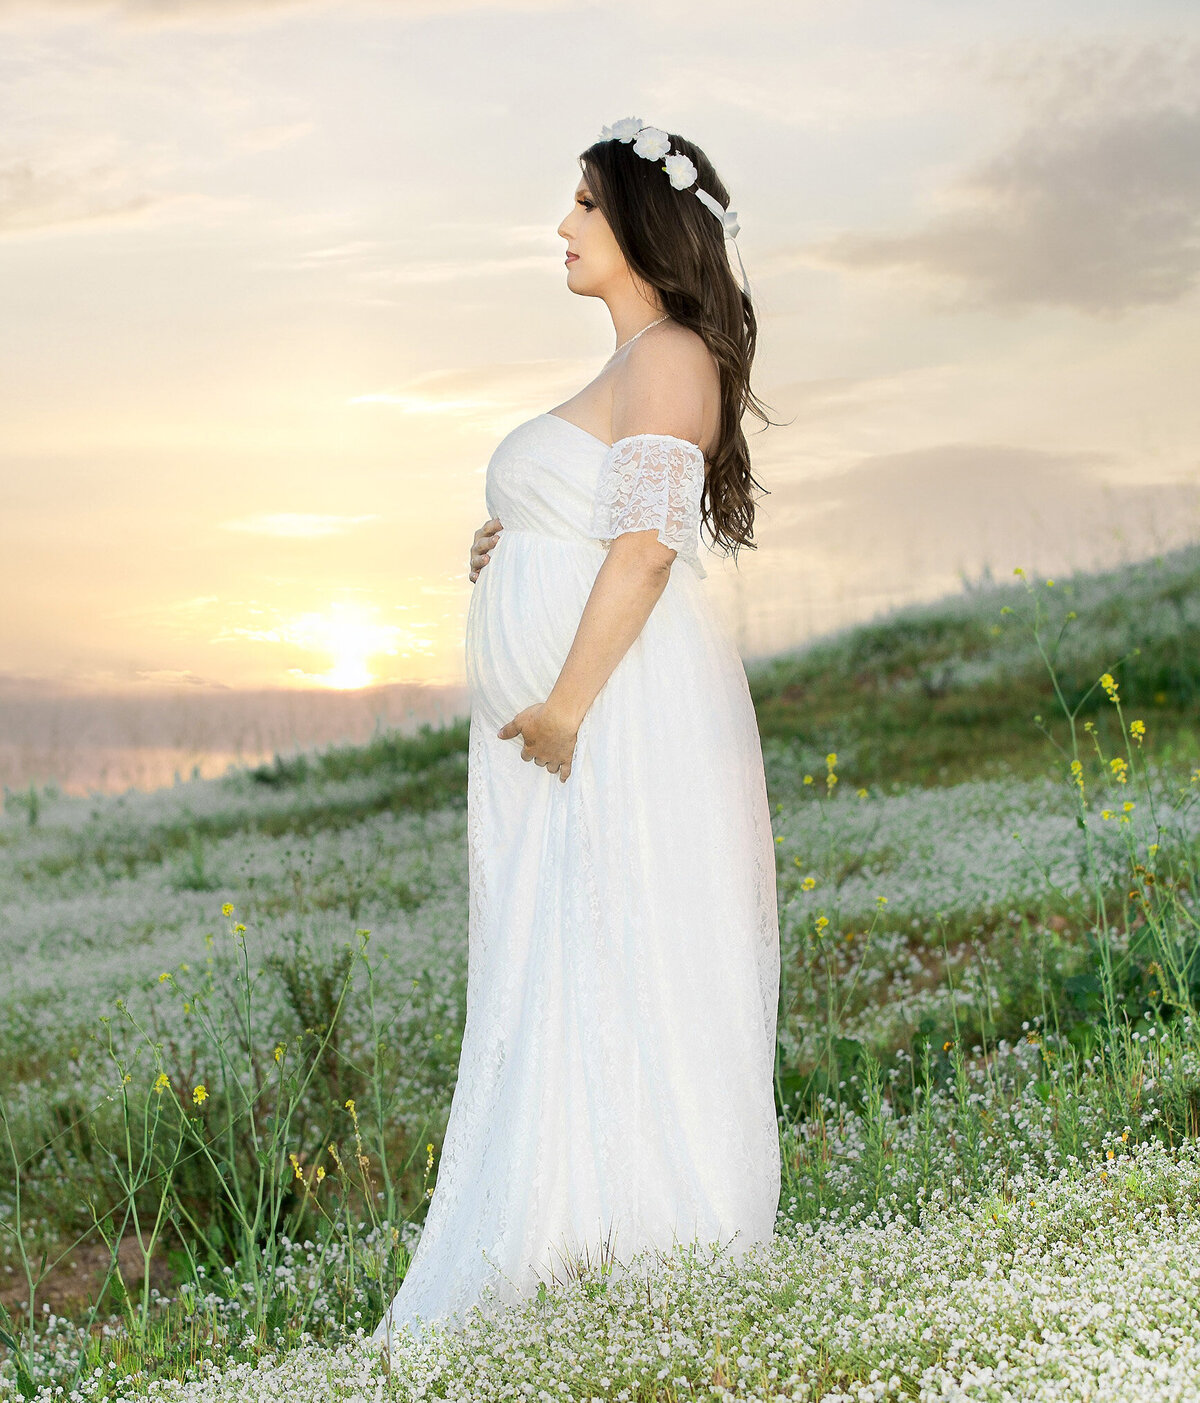 Charlotte maternity photographer, maternity photography in Chalrotte NC, professional maternity photos near me